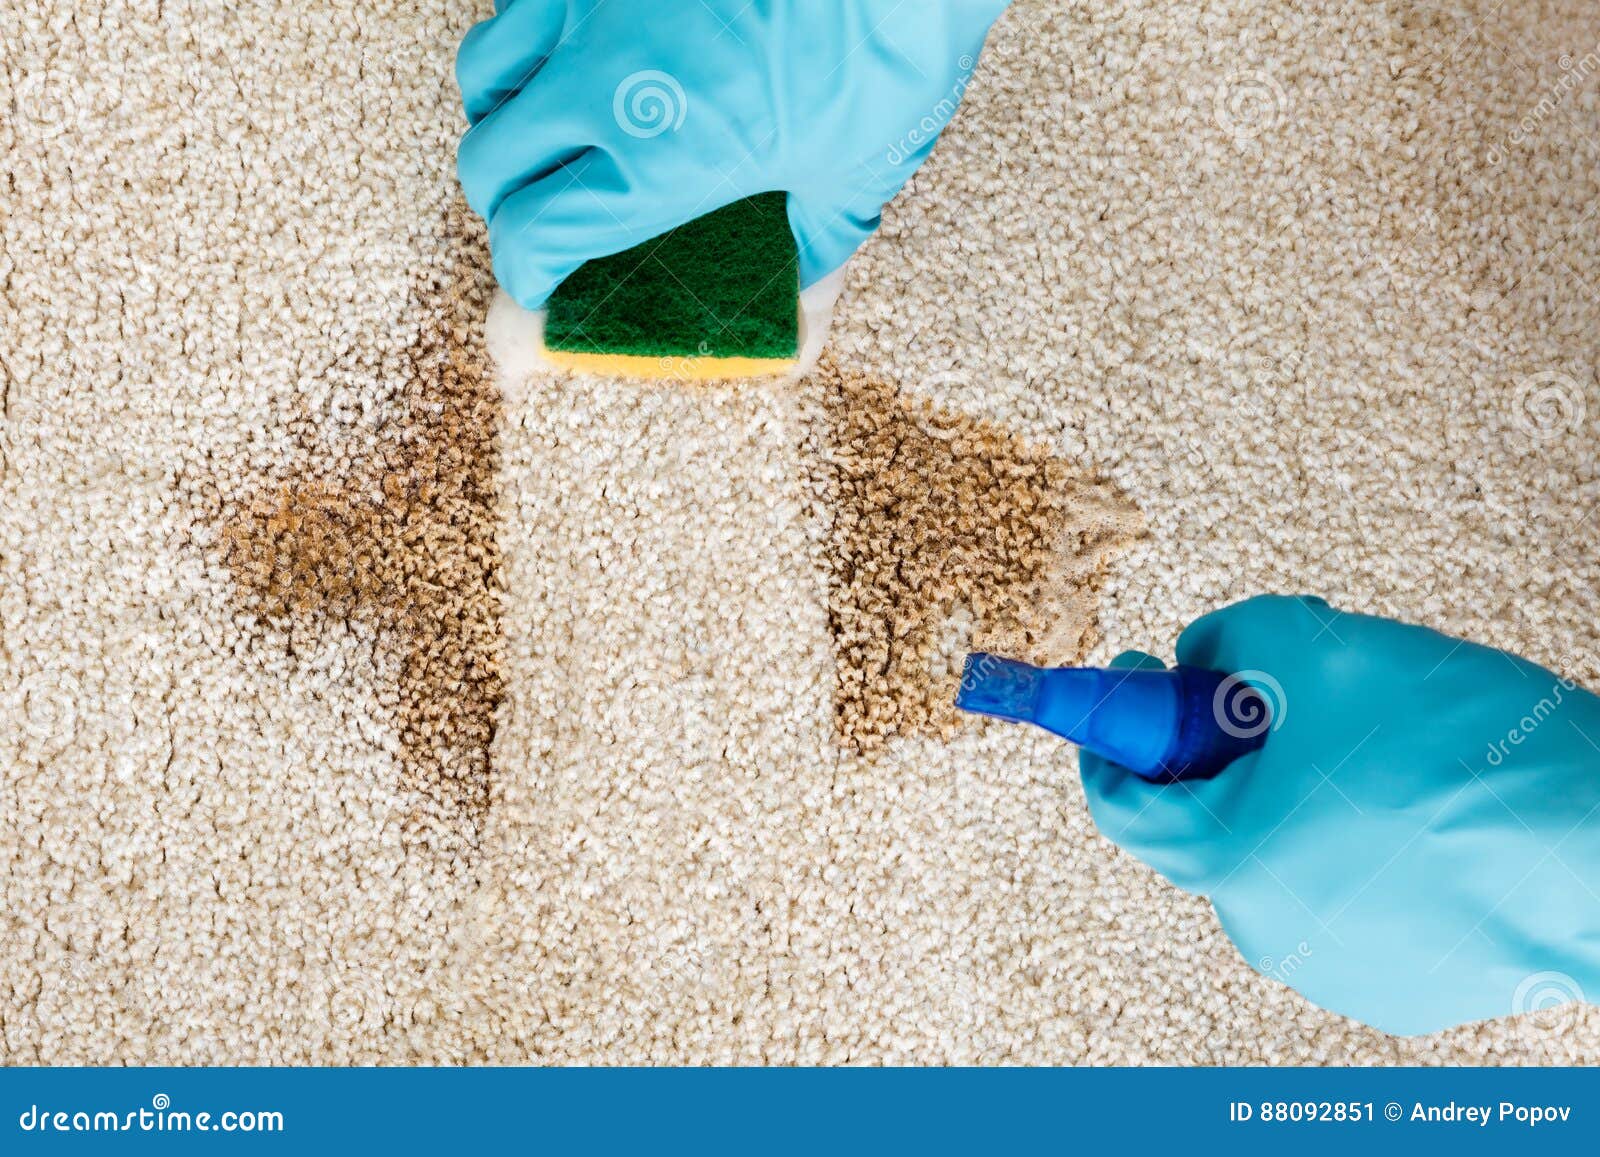 person cleaning stain with sponge on carpet